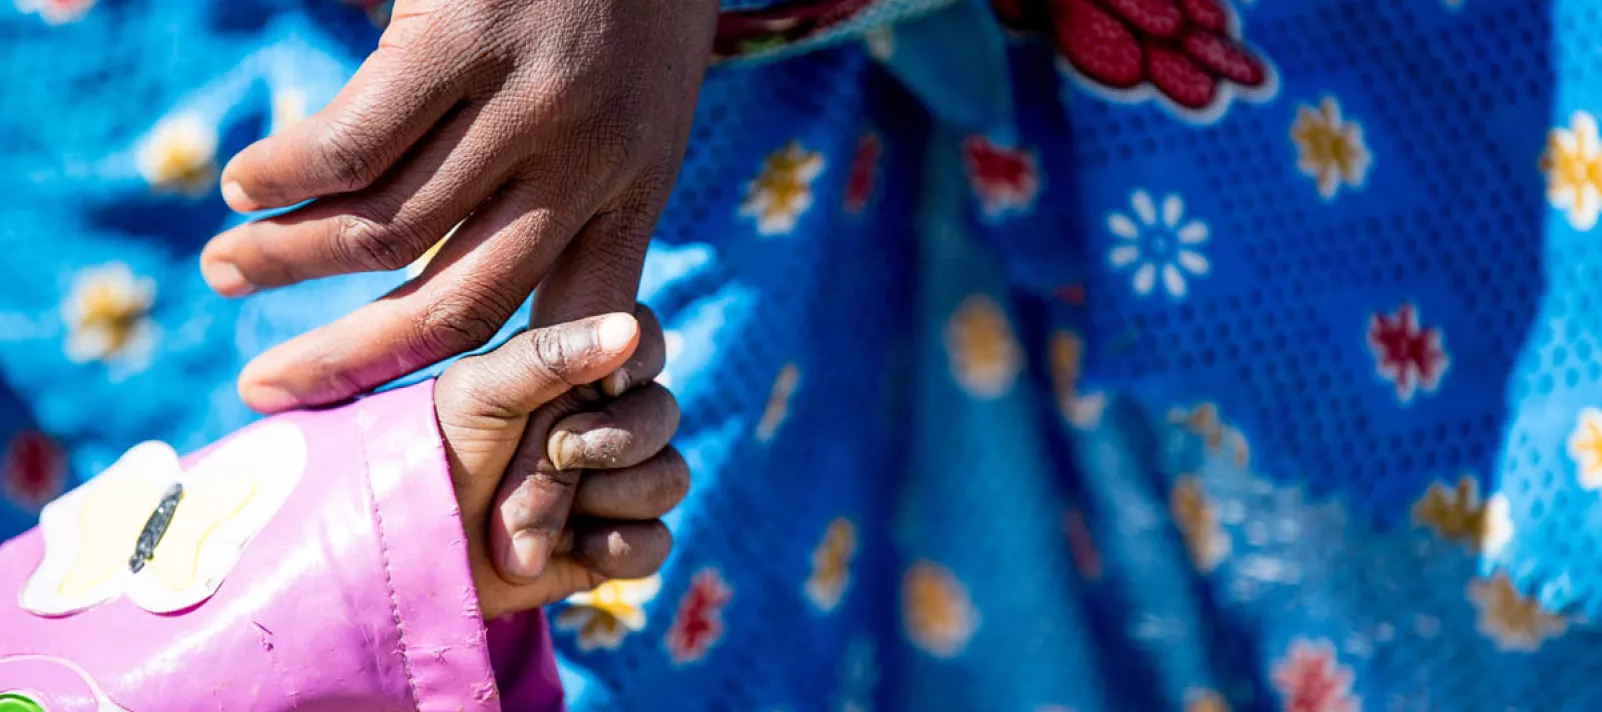 A mother and a child hold hands. UNICEF/Angola/2016/Karin Schermbrucker